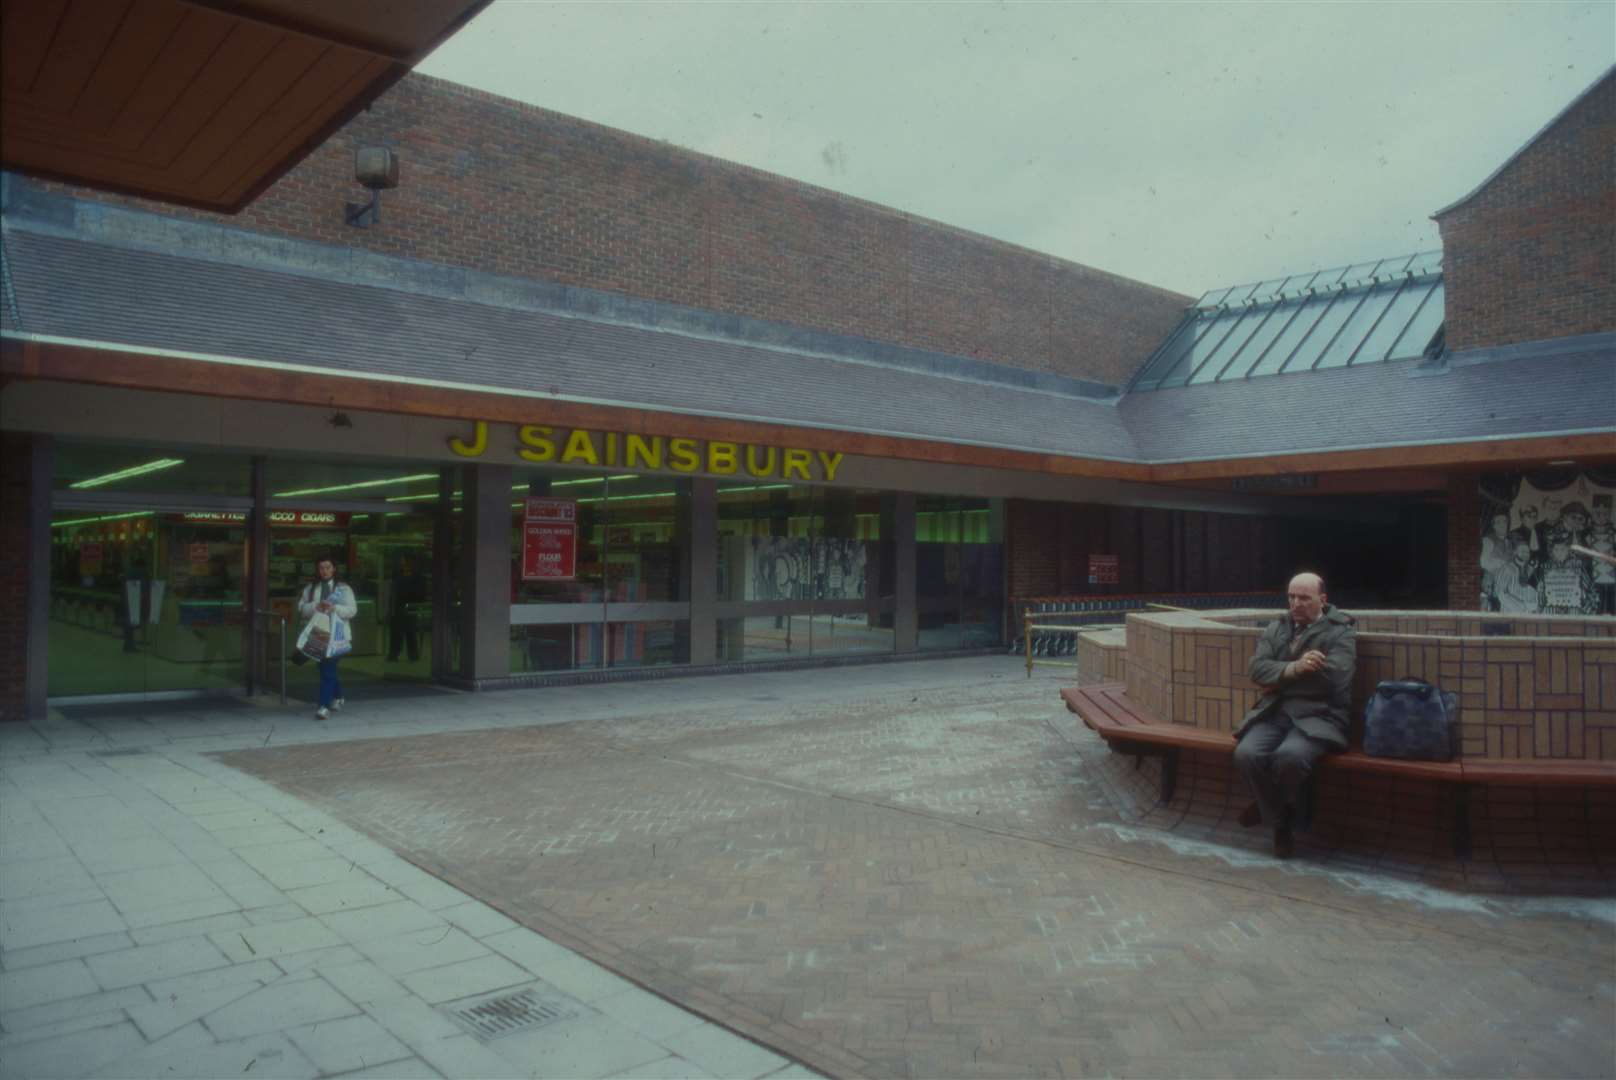 Sainsbury's store in St George's Square, Gravesend, in 1982. Picture: The Sainsbury Archive, Museum of London Docklands